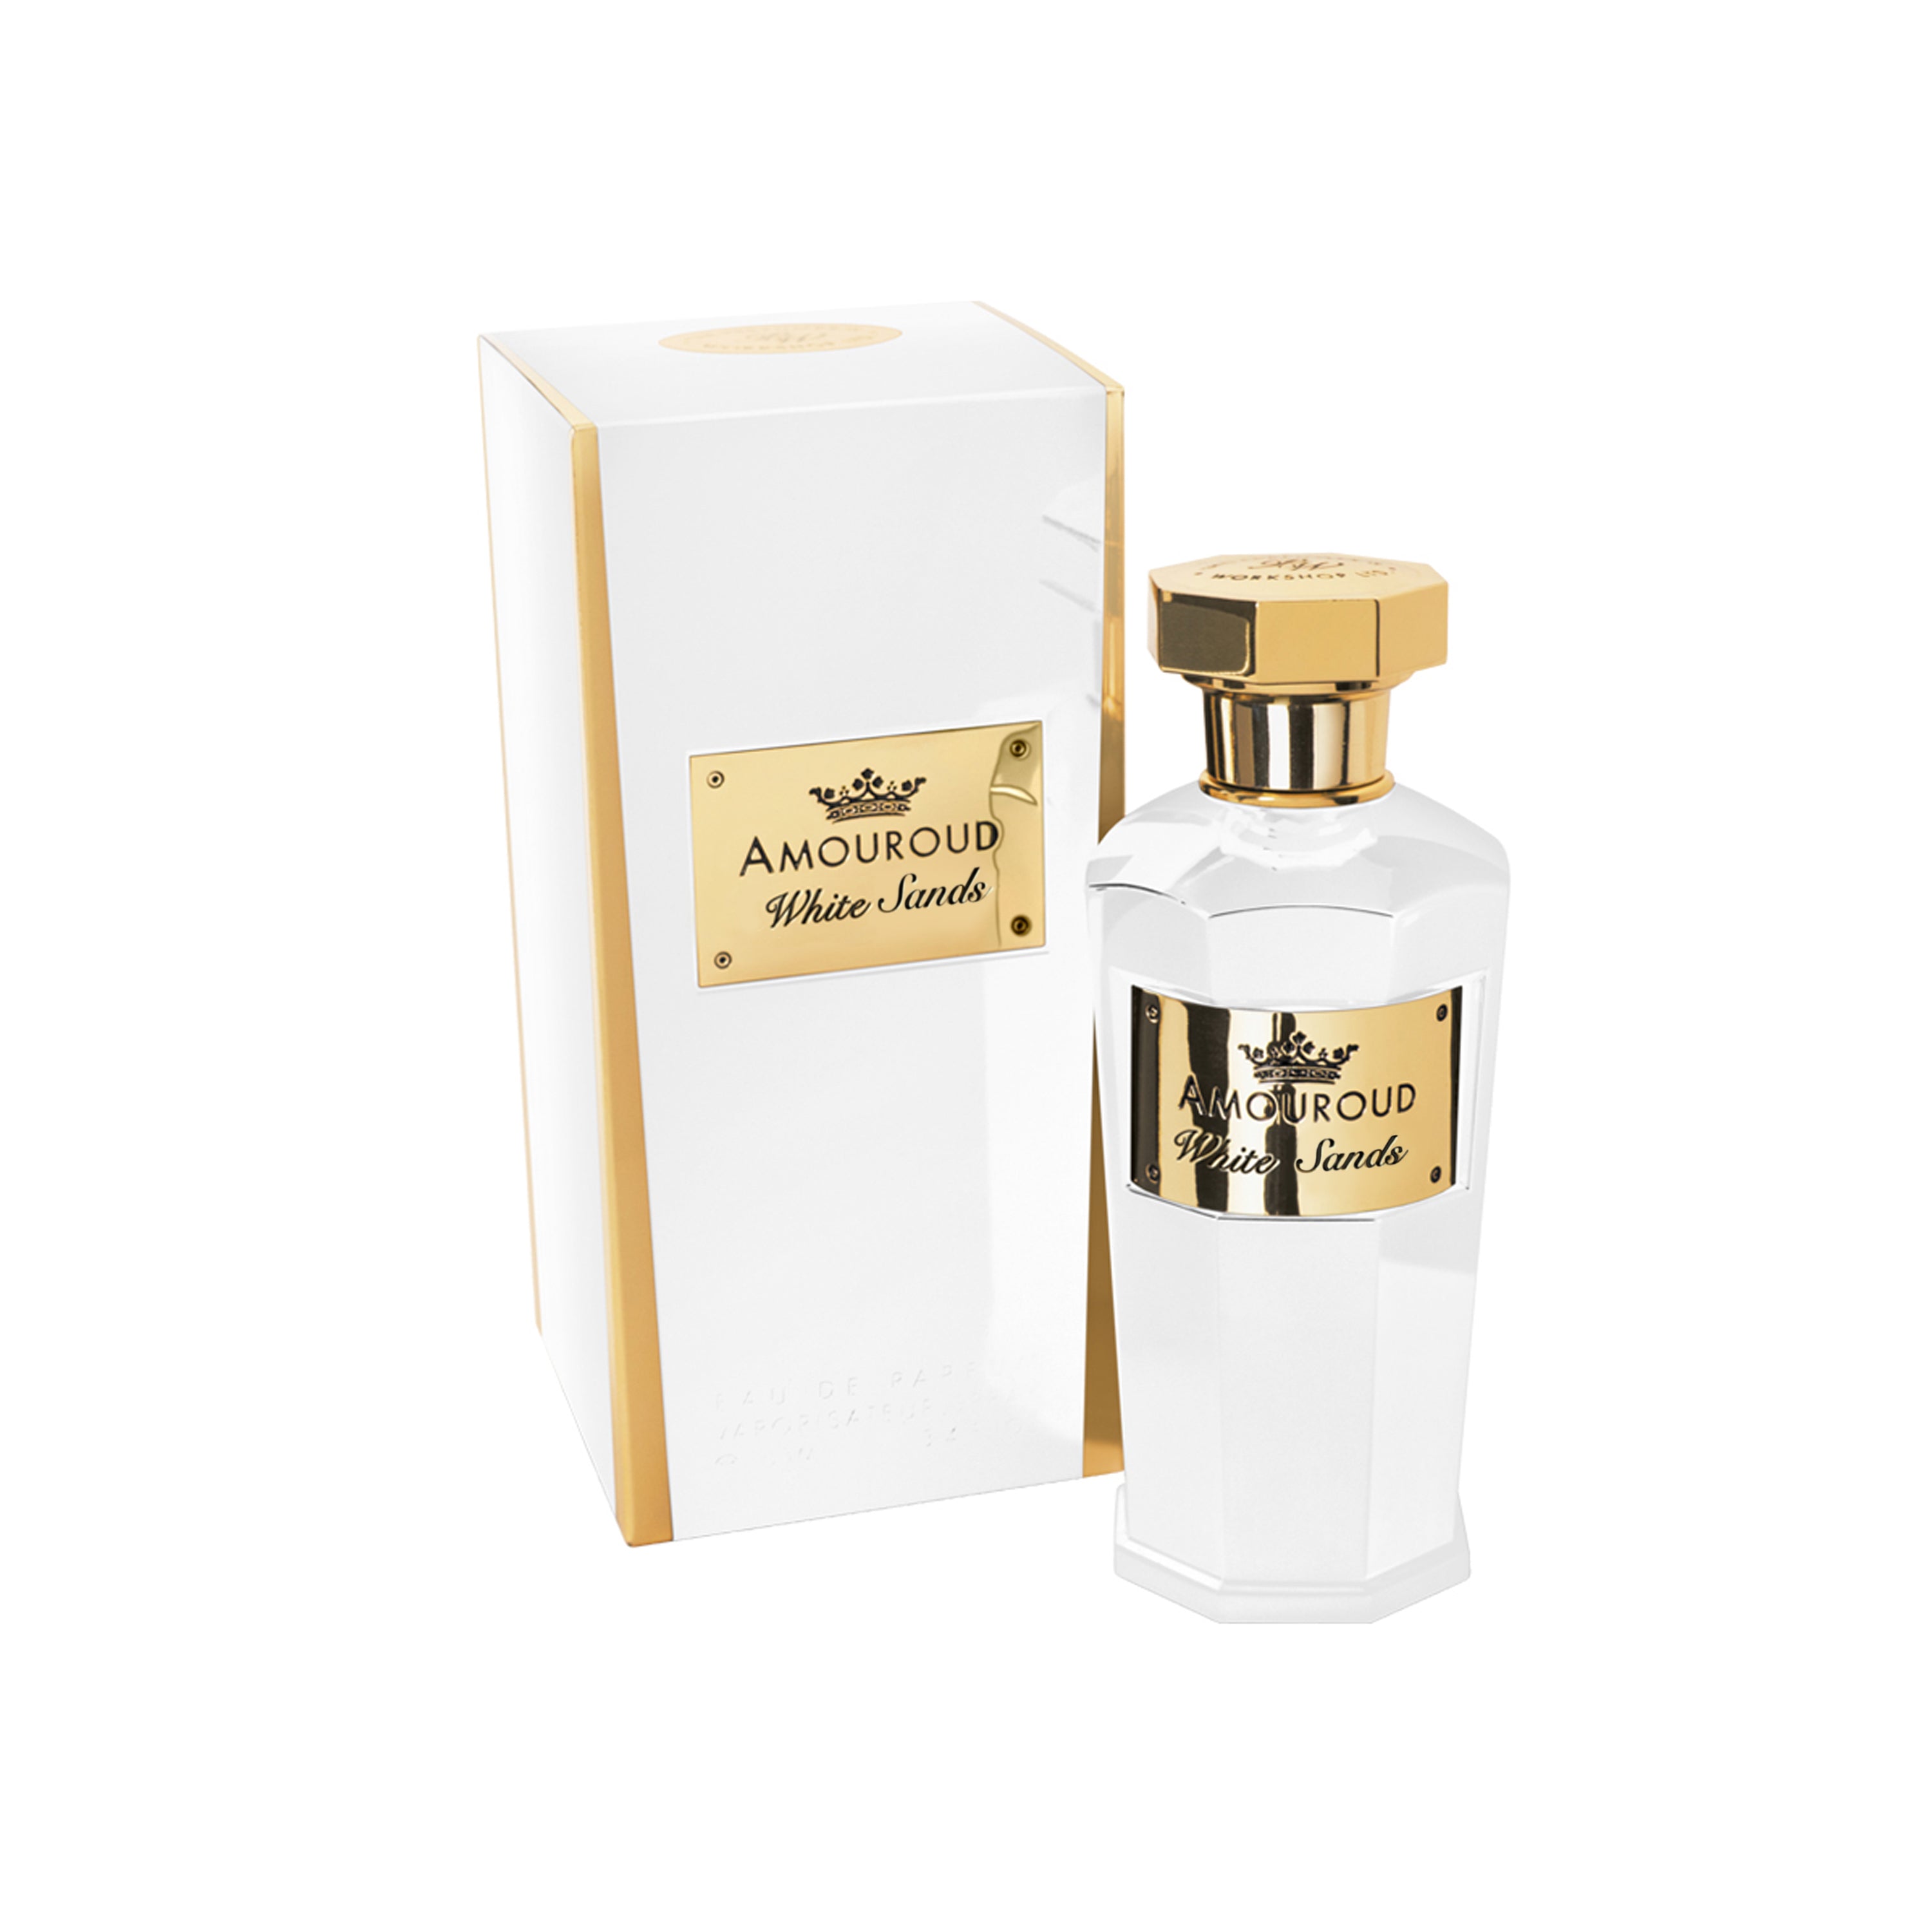 Amouroud White Sands EDP M 100ml Boxed (Rare Selection)